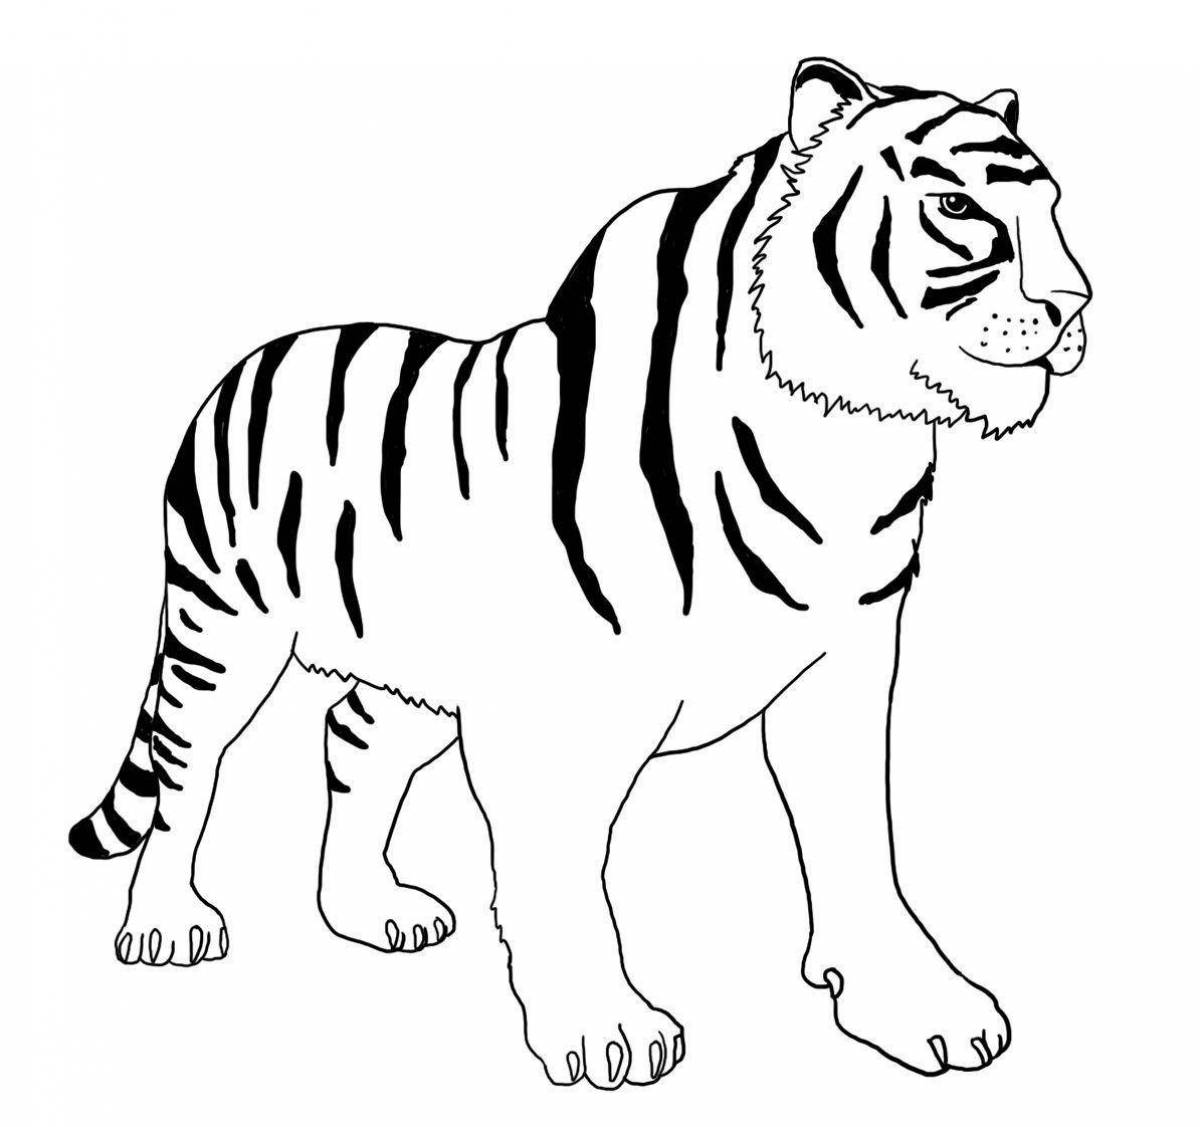 Fabulous tiger coloring book for kids 6-7 years old